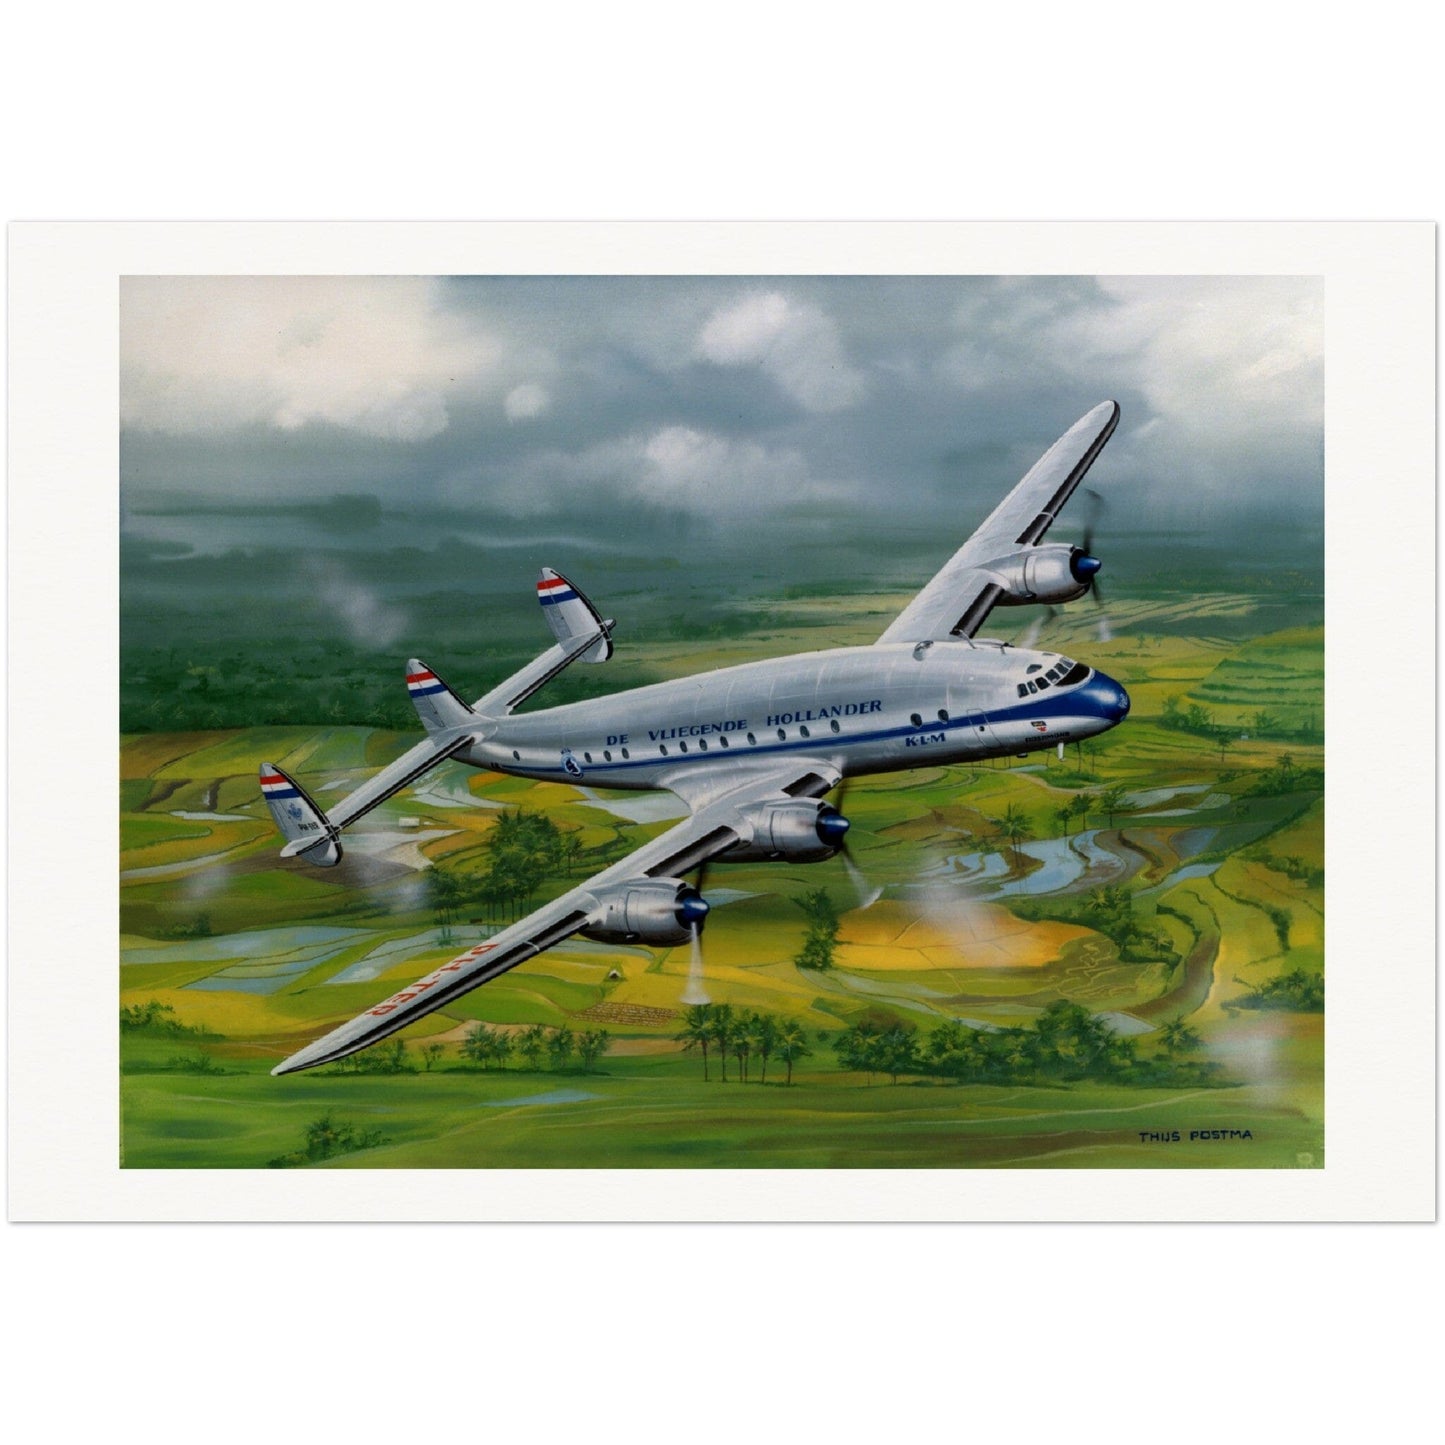 Thijs Postma - Poster - Lockheed L-749 Over Sawahs Poster Only TP Aviation Art 70x100 cm / 28x40″ 